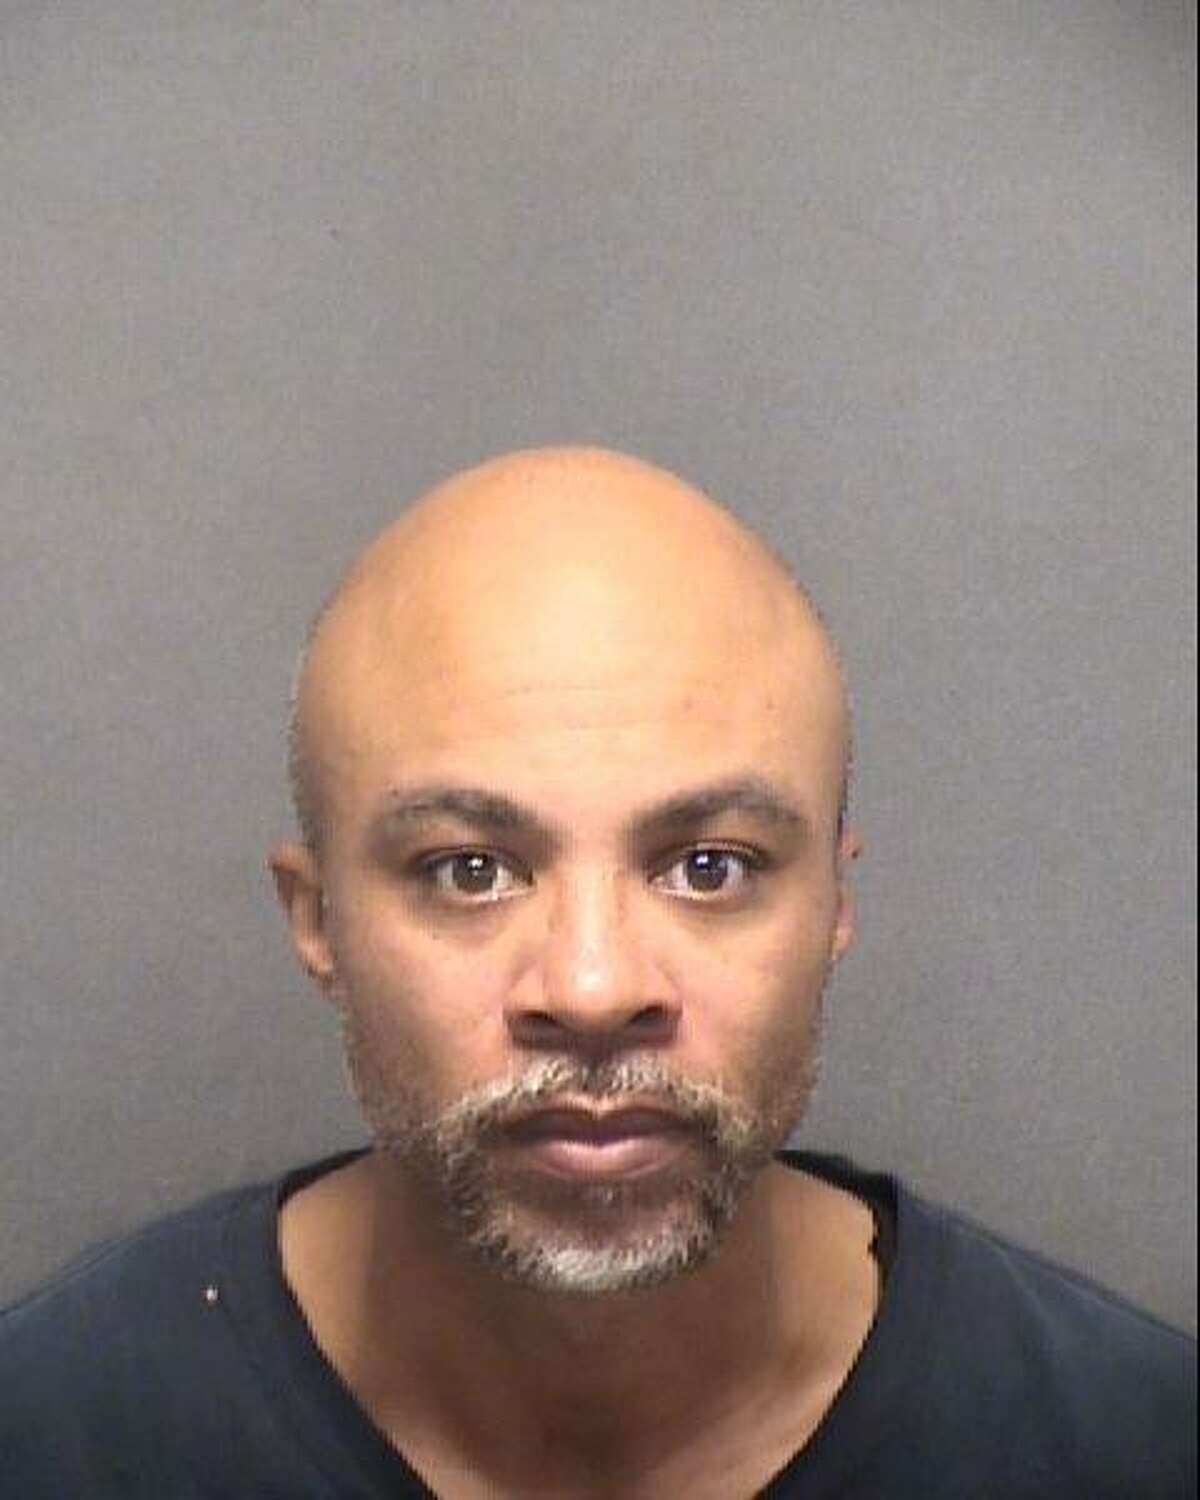 Aaron Lee, 38, is accused of killing his ex-girlfriend and wounding her male friend on Dec. 30.